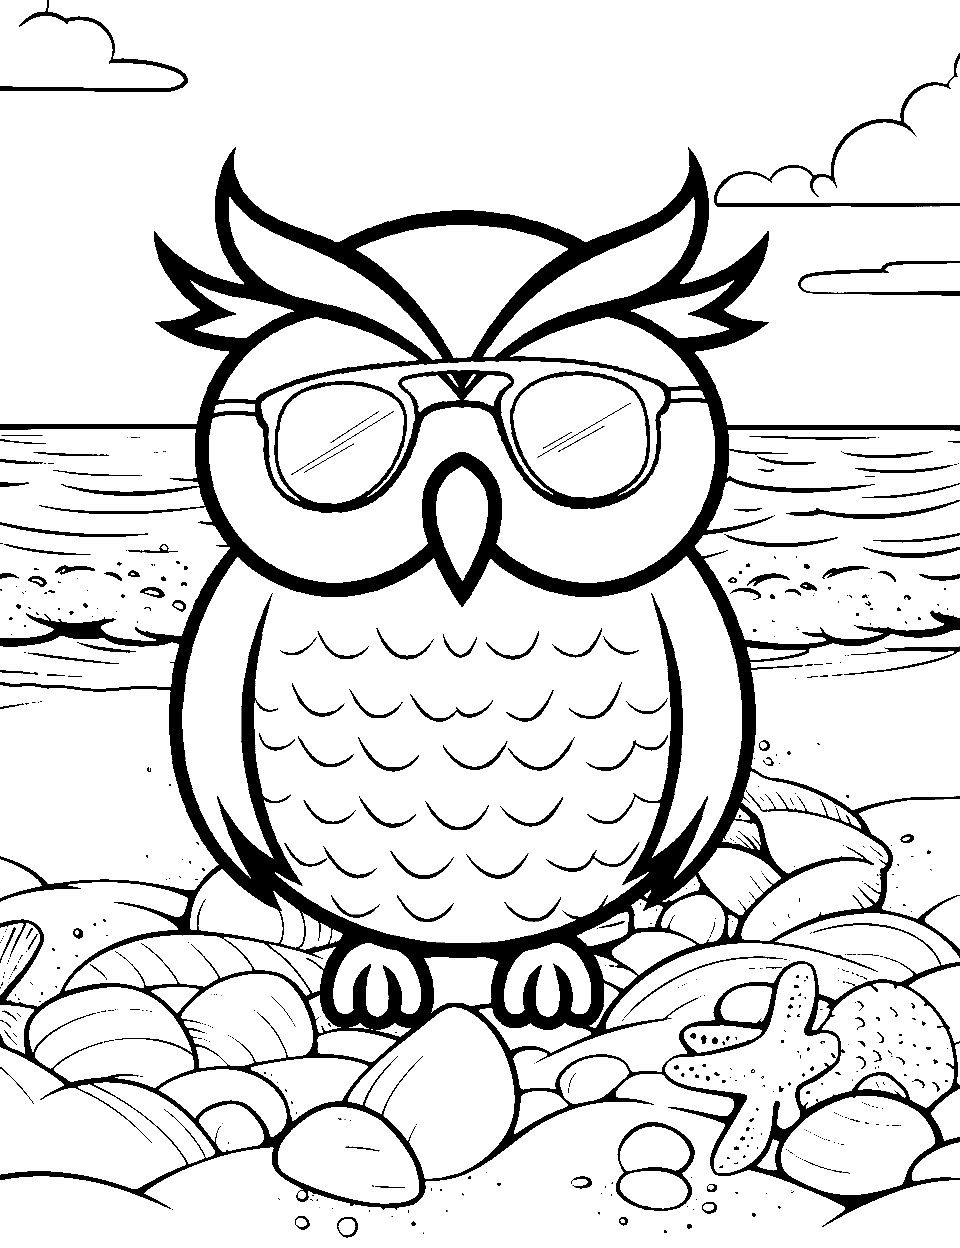 Beach Owl Coloring Page - A cool owl wearing glasses, relaxing on a beach.